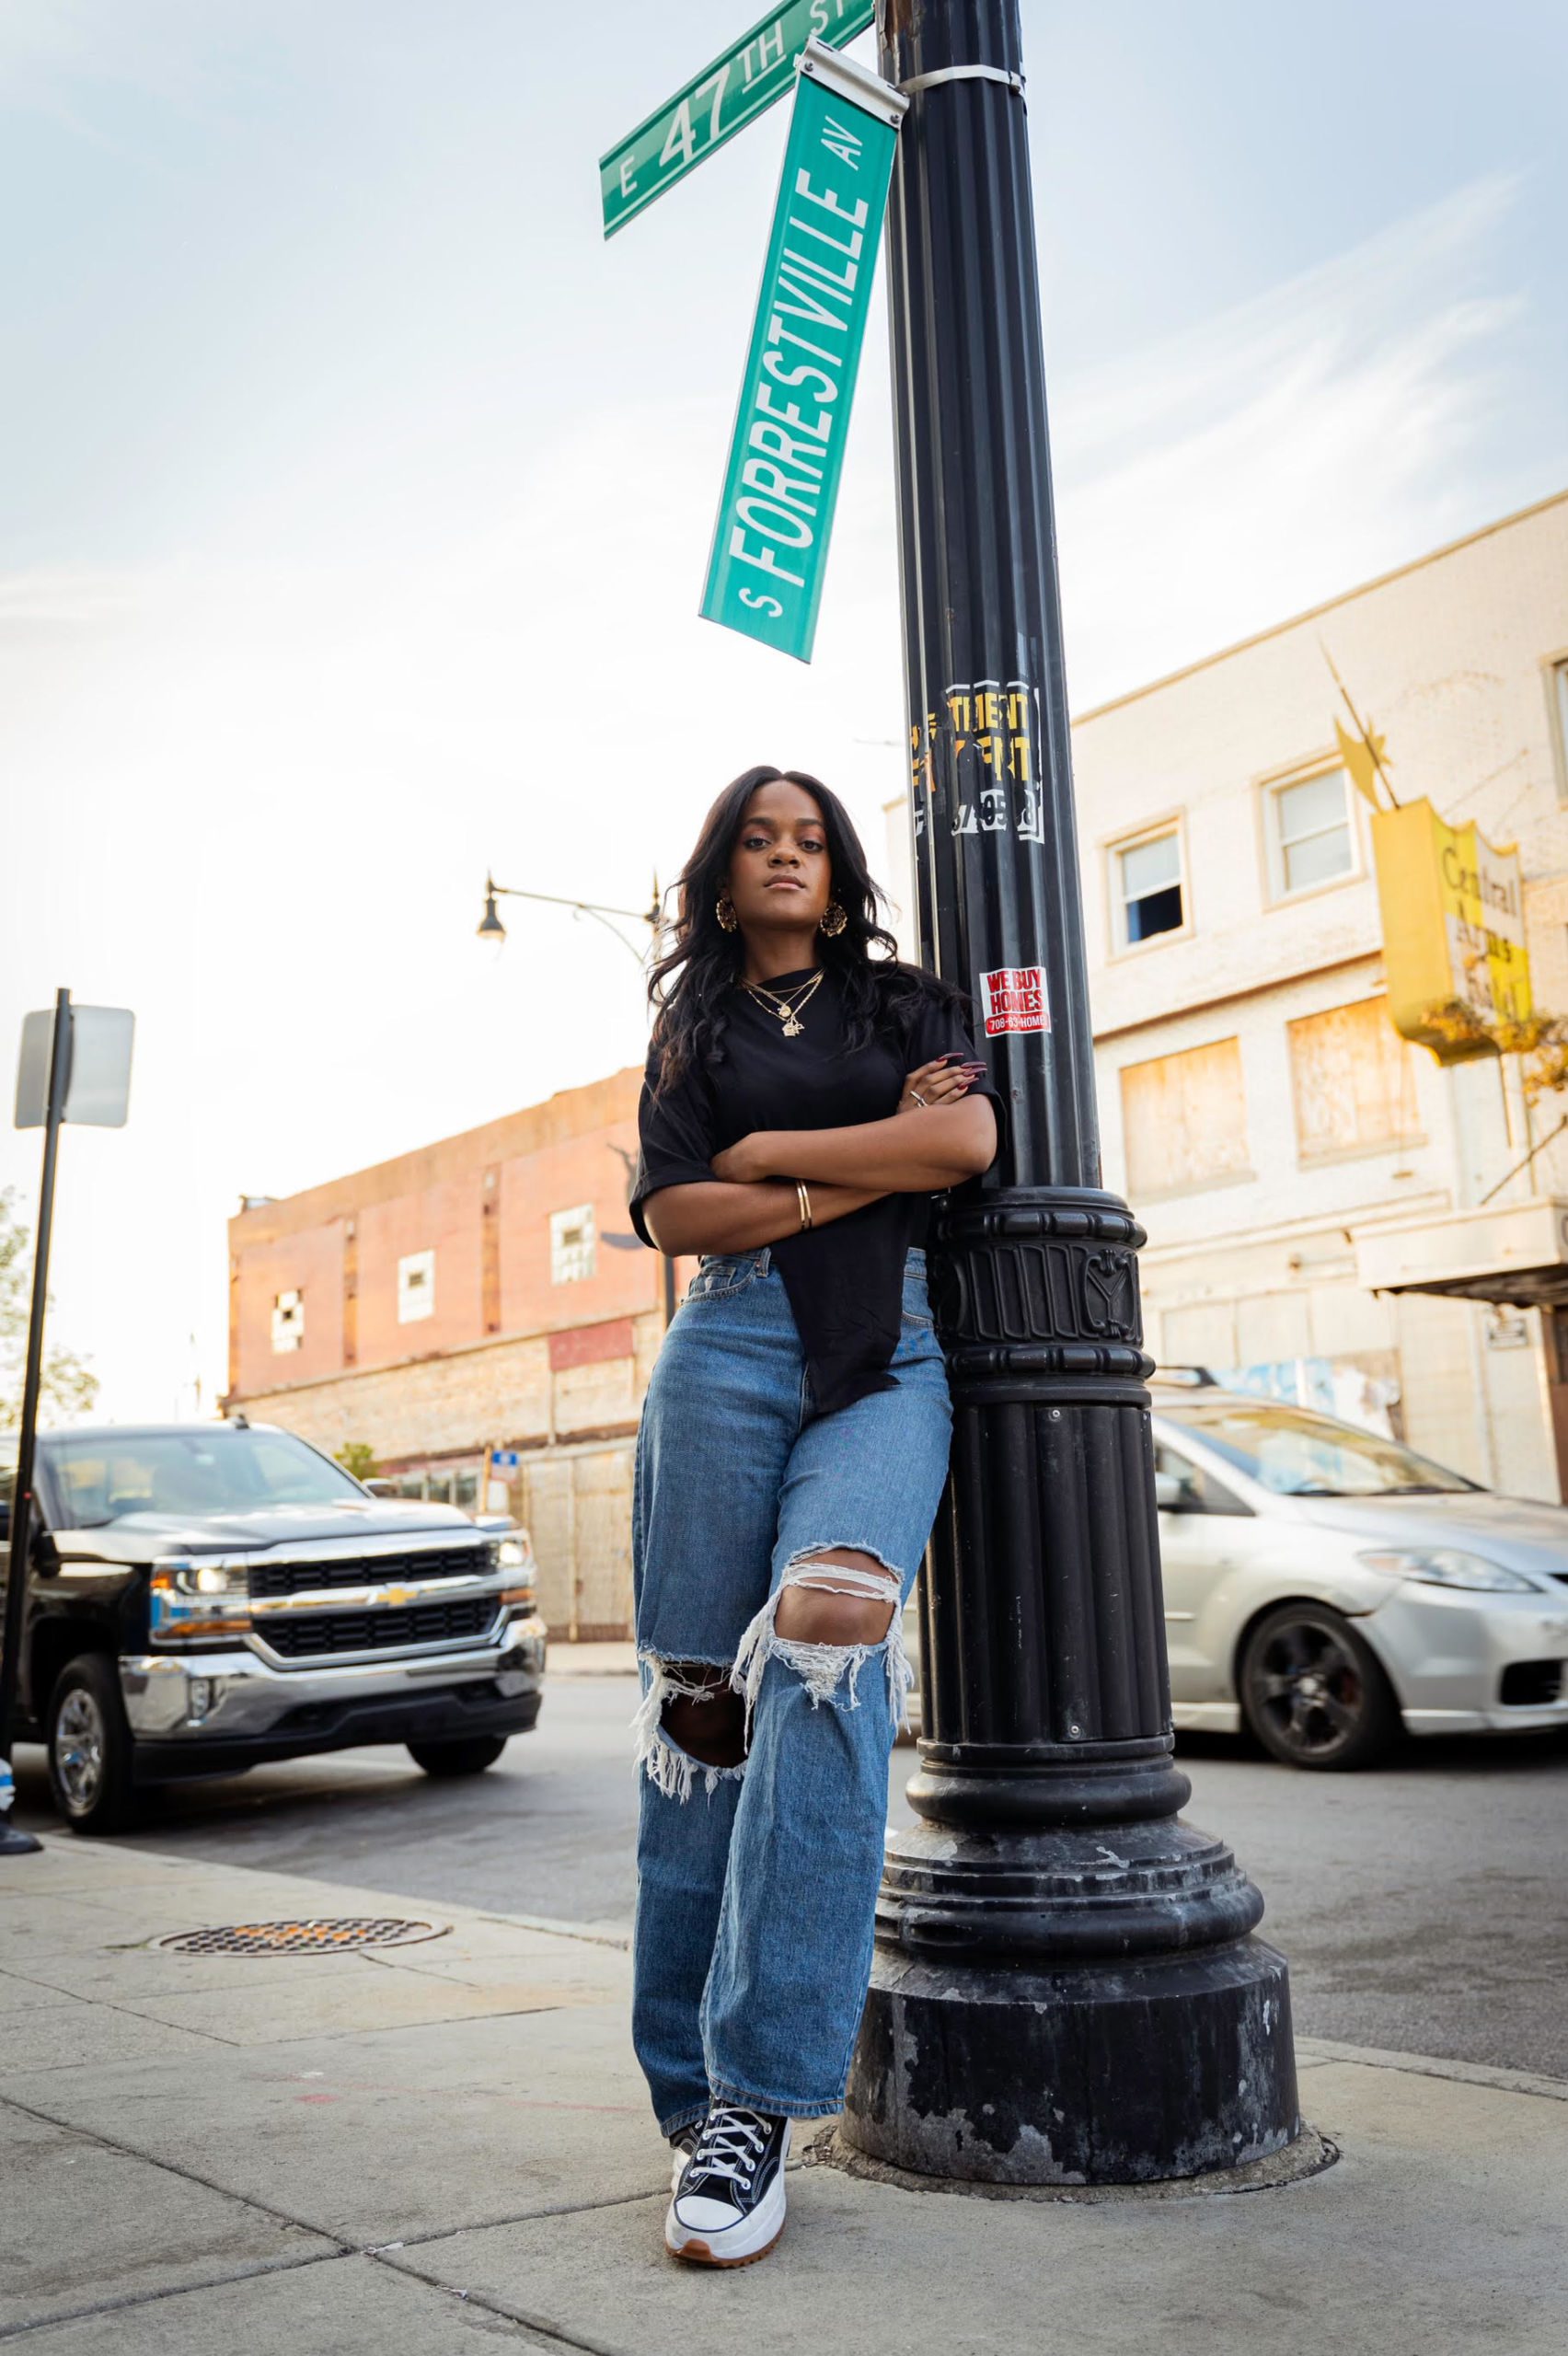 Photo shows a full body portrait of Michelle Thompkins, founder and CEO of The CornerStore Chicago. Michelle is a Black woman, wearing a black t-shirt, ripped jeans, and black Converse while leaning against a street lamp. Above her are street signs that read "South Forrestville Ave" and "East 47th Street". Behind her is a Chicago street with cars and buildings.